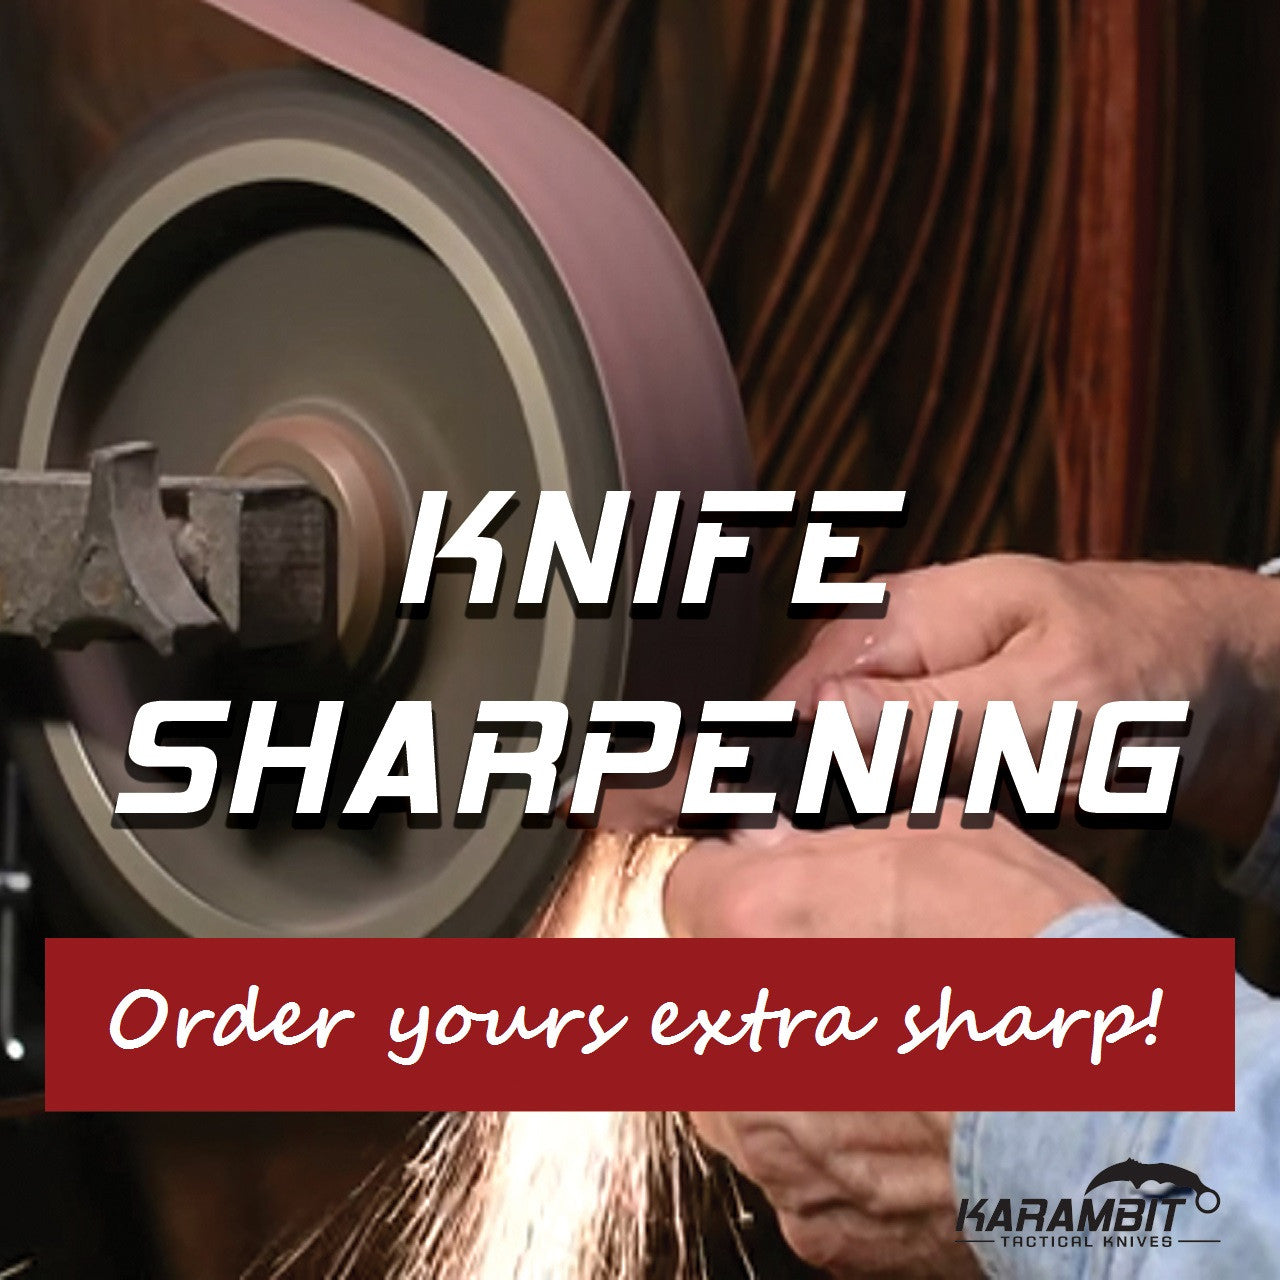 Reviews of Professional Knife Sharpening Services